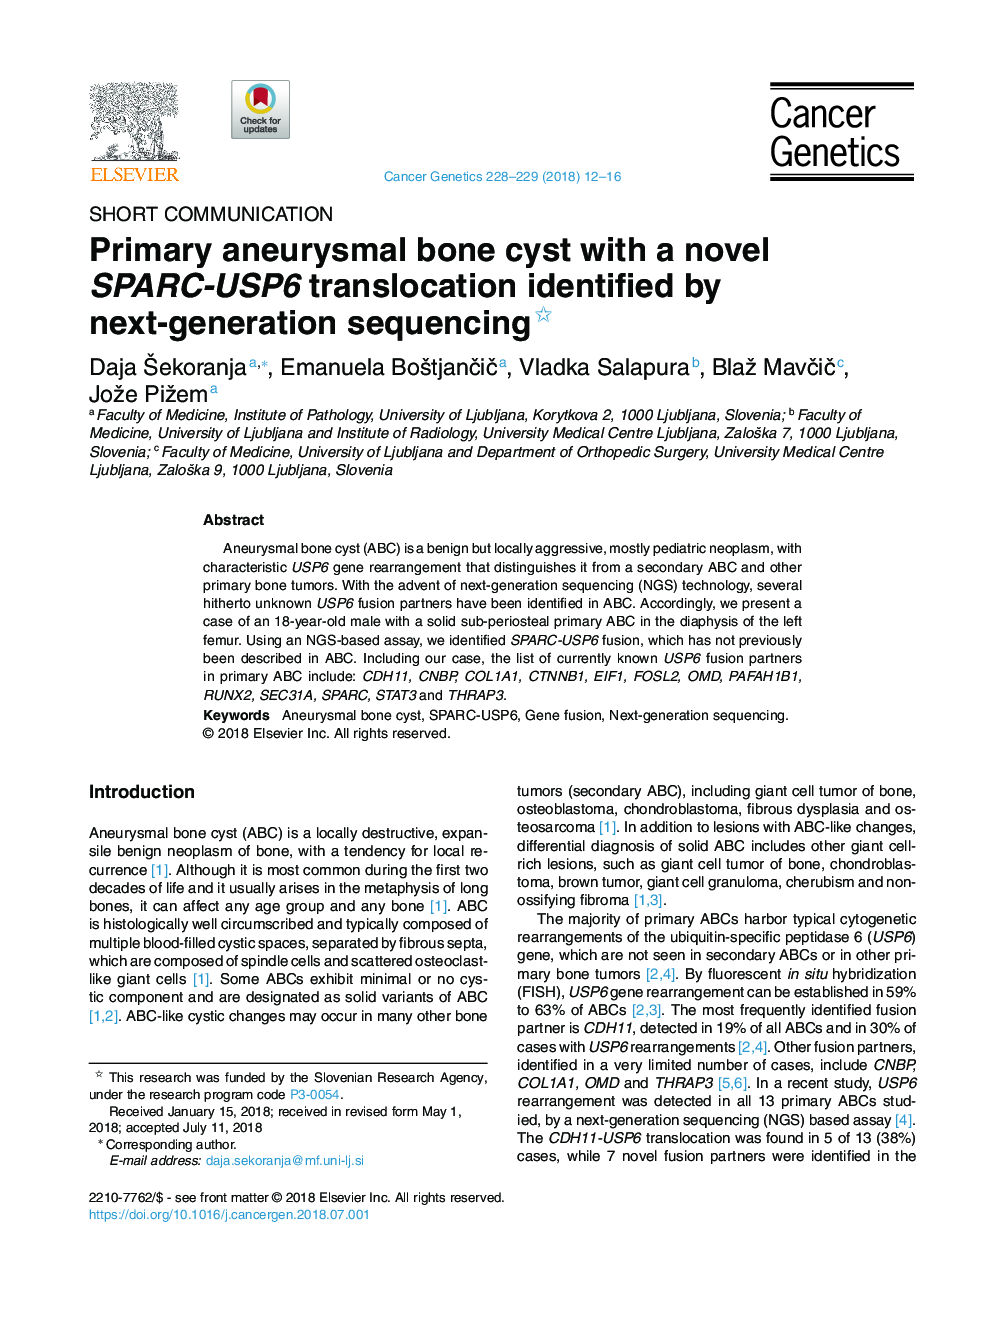 Primary aneurysmal bone cyst with a novel SPARC-USP6 translocation identified by next-generation sequencing